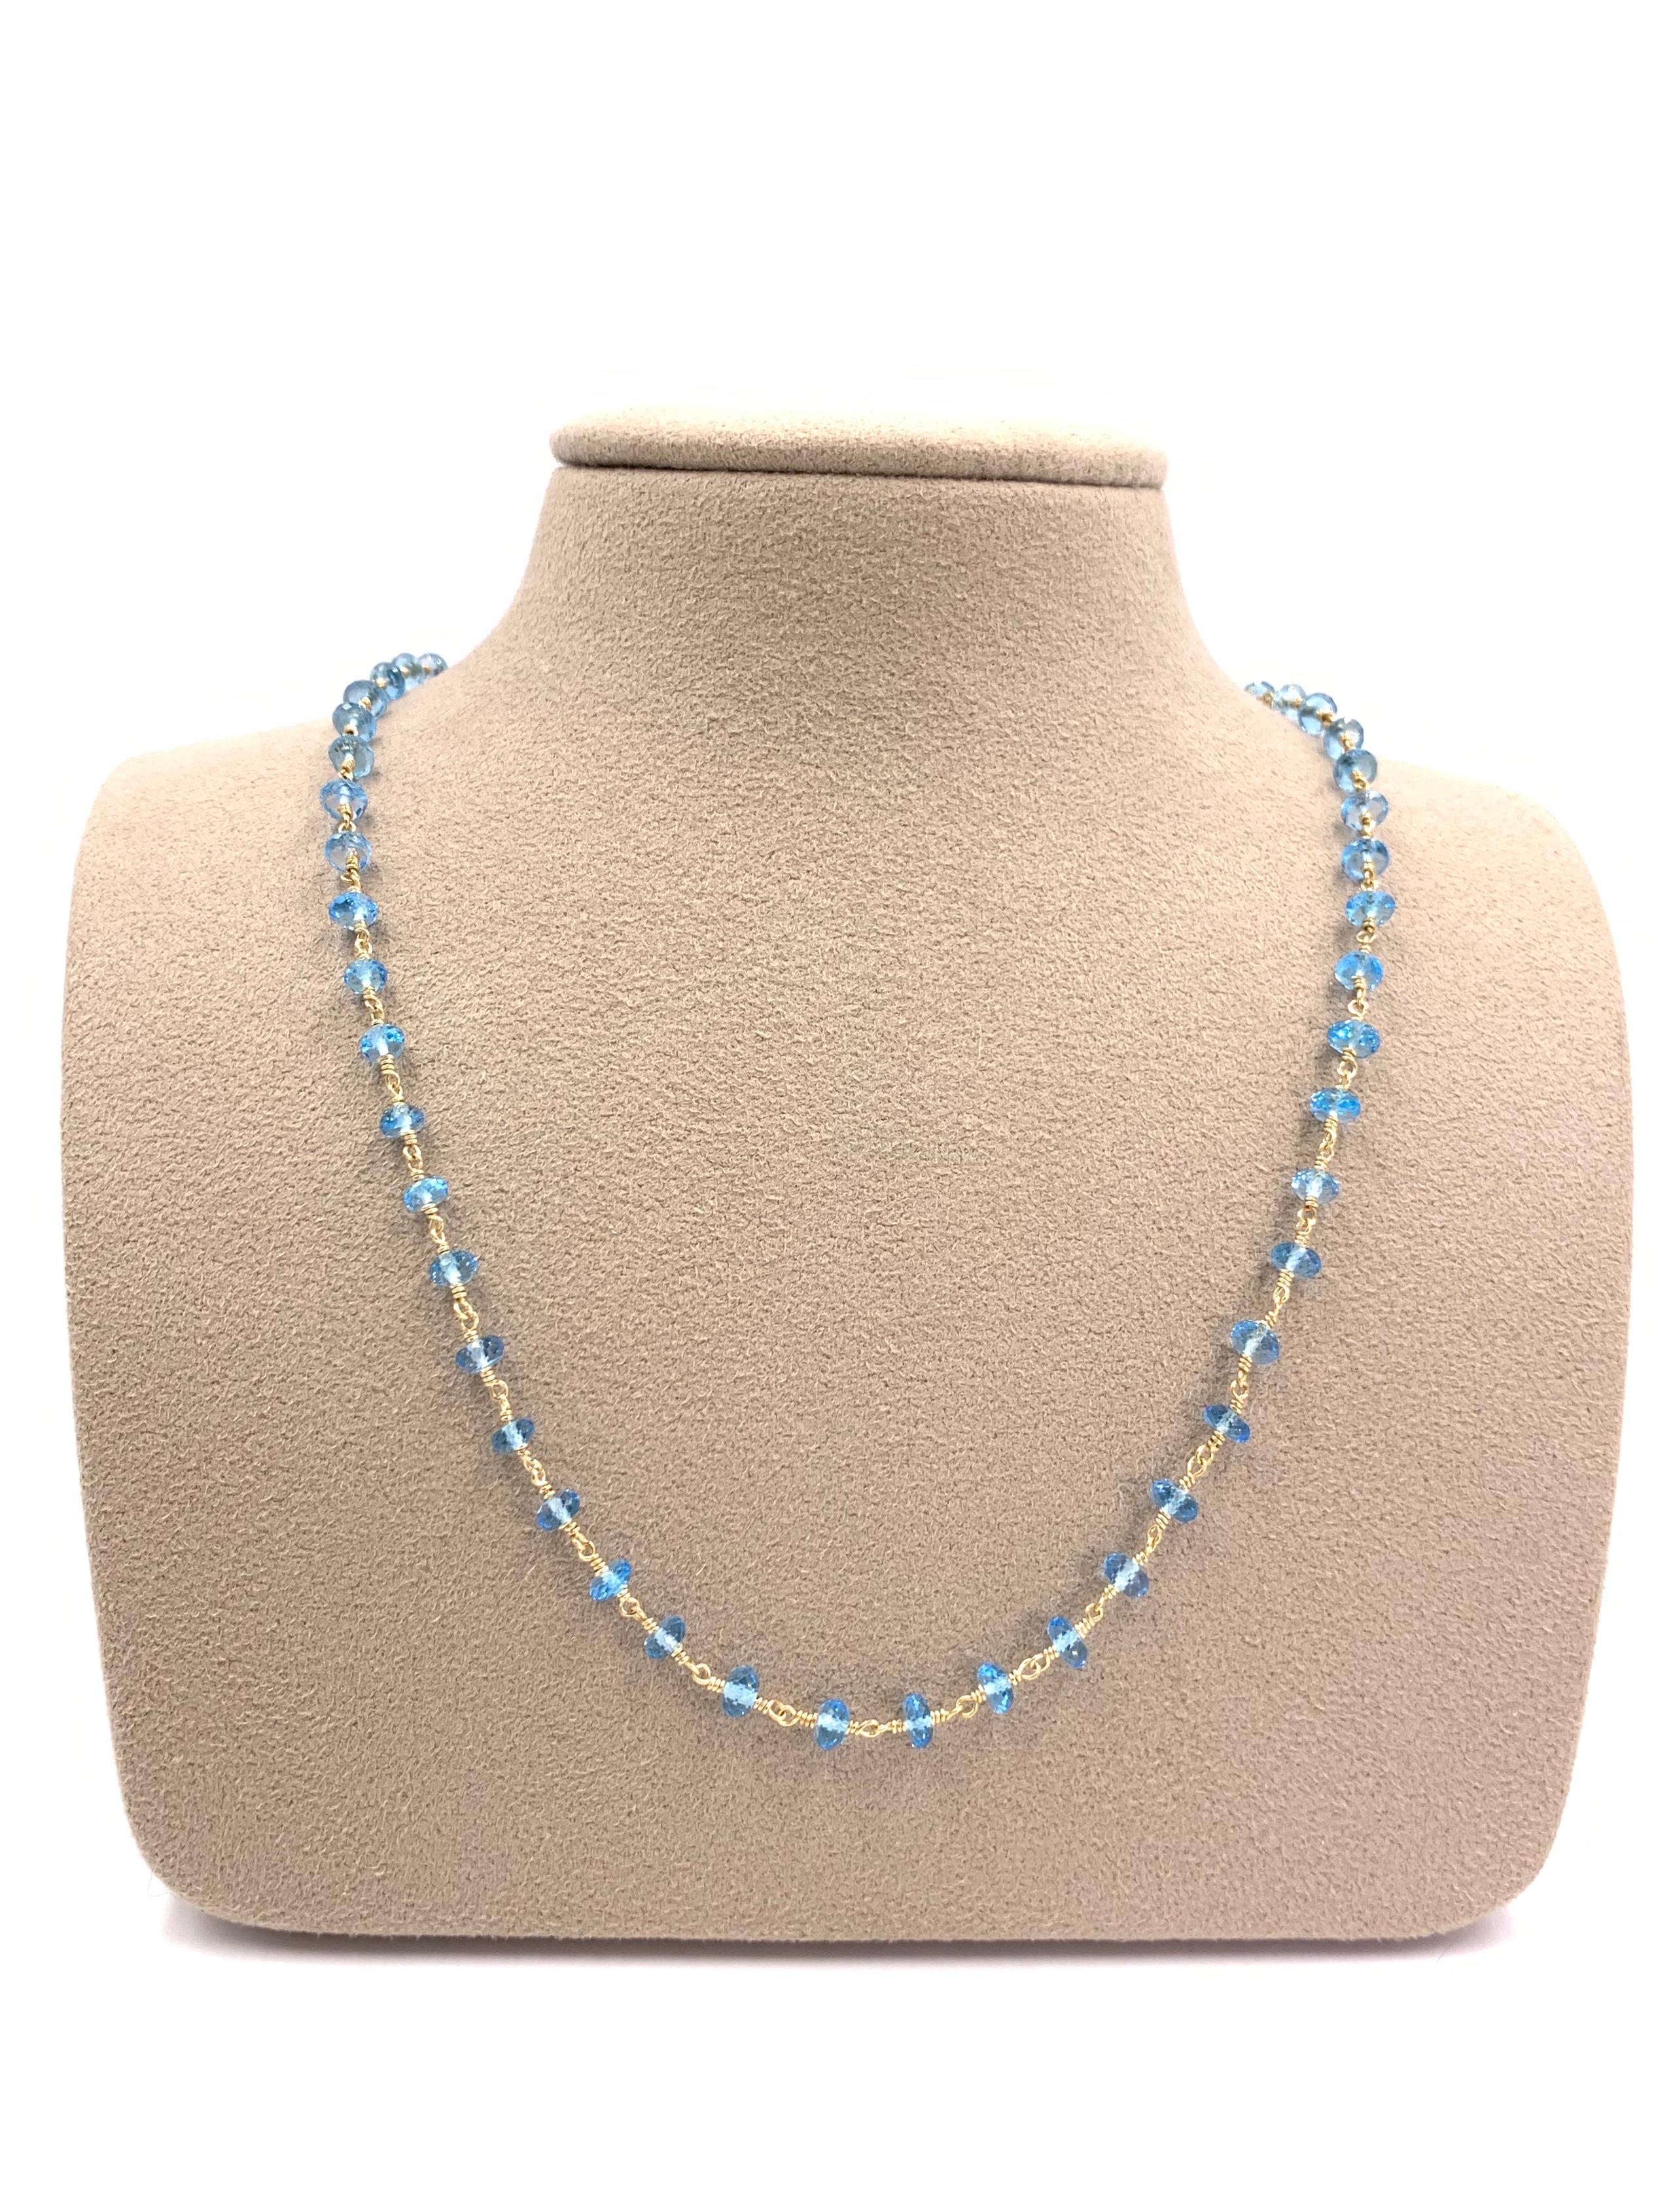 A wearable necklace with a refreshing pop of color. 55 Faceted bead-cut sky blue topaz gemstones are stationed on a 14 karat yellow gold 'dog-bone' style chain. Necklace is fixed with a lobster clasp. Width of each topaz measures approximately 4mm.